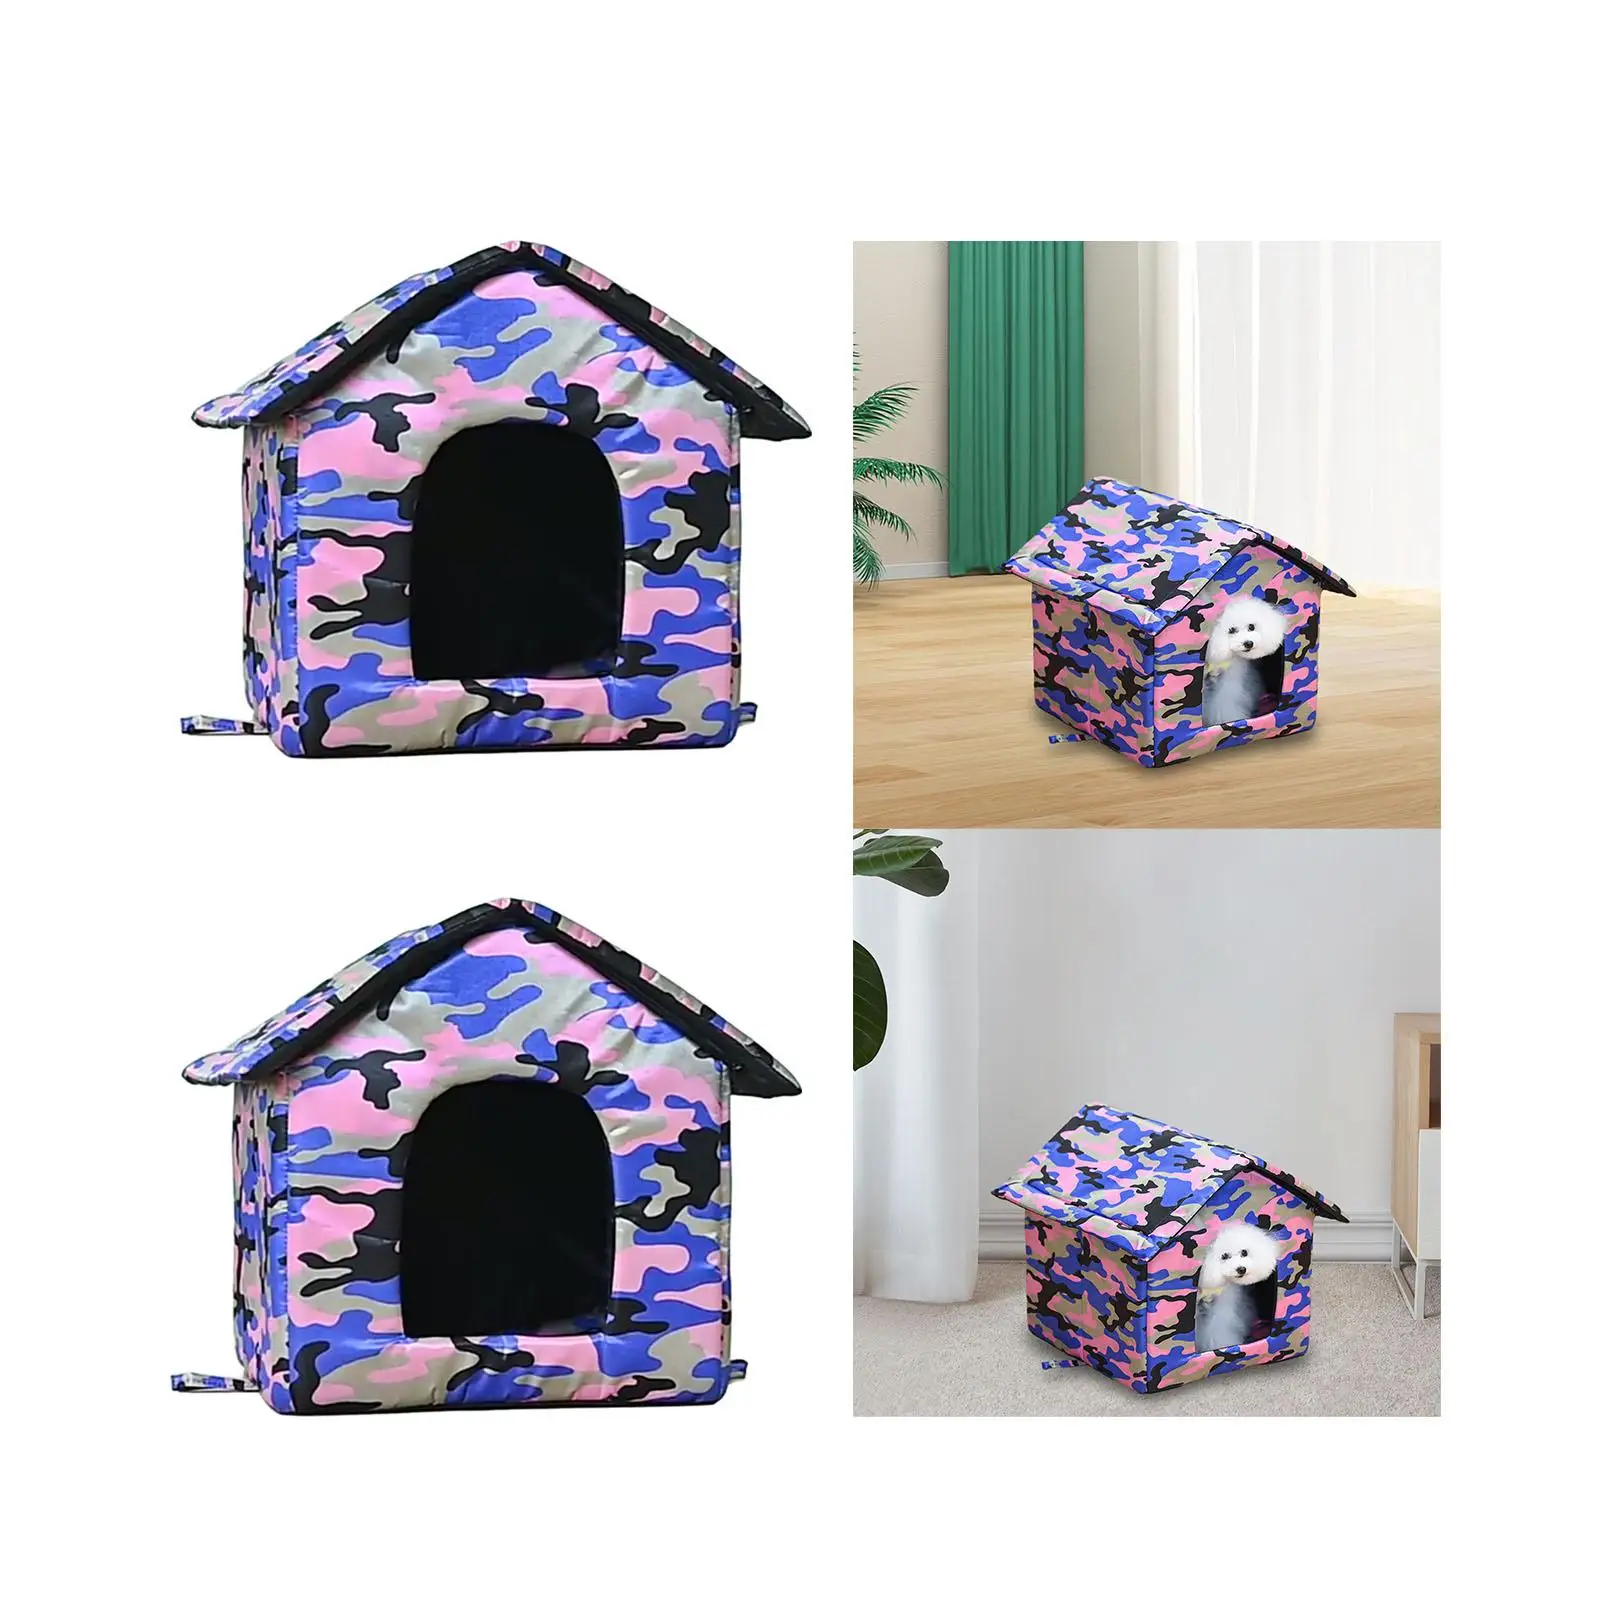 Foldable Cave, House Outdoor Pet Shelter, Detachable Rainproof Foldable Pet Sleeping Bed, Pet House for Outdoor Courtyard